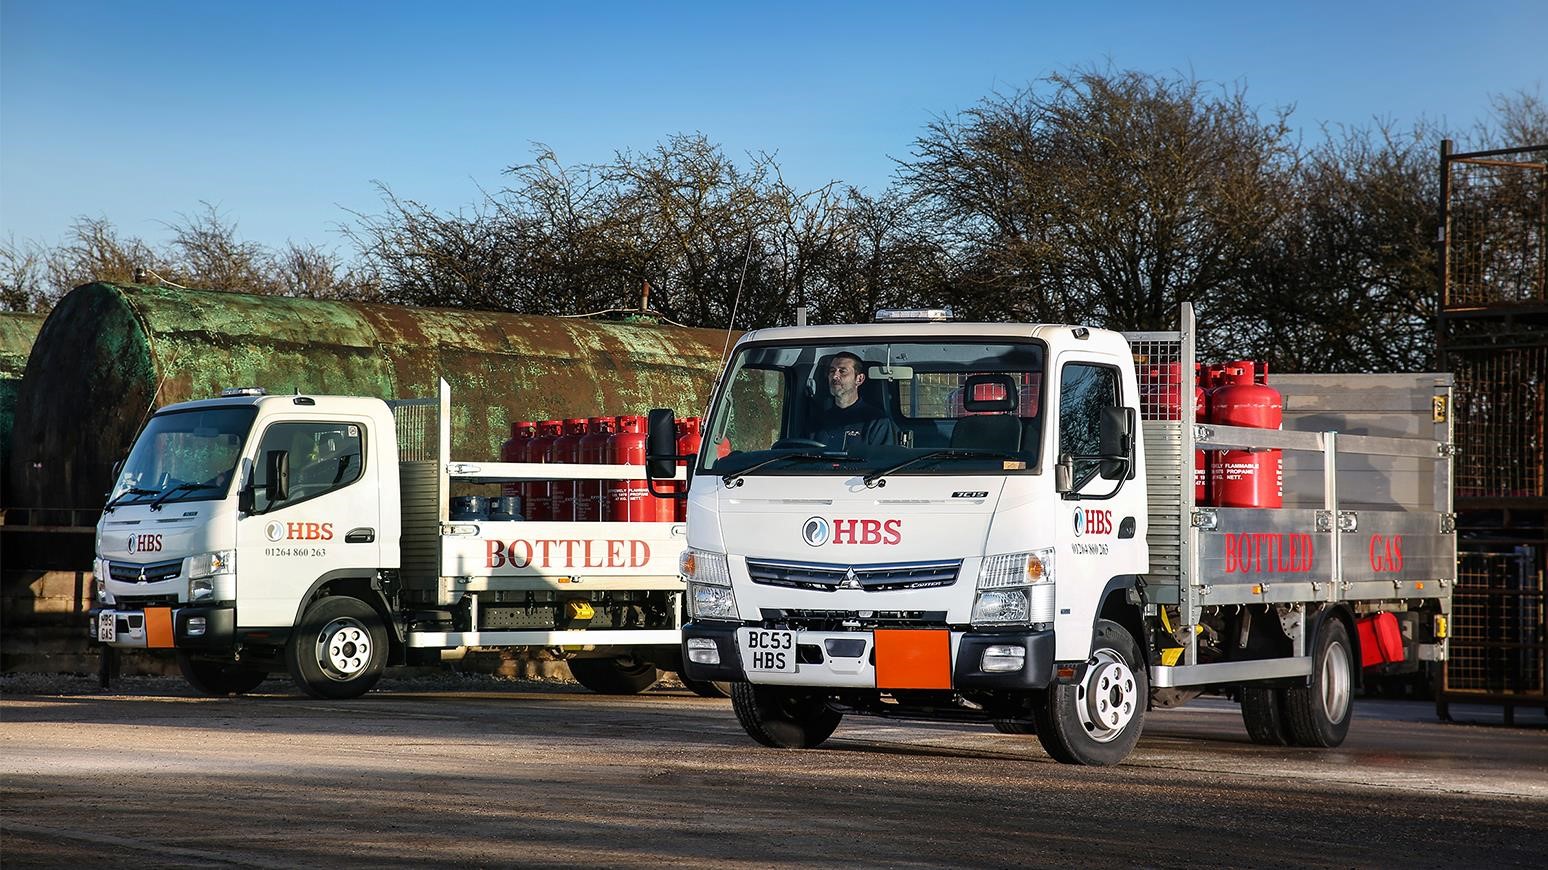 Andover Area Oil & Gas Supplier HBS Fuels Replaces Older Mitsubishi FUSO Canters With New 7.5-Tonne Models